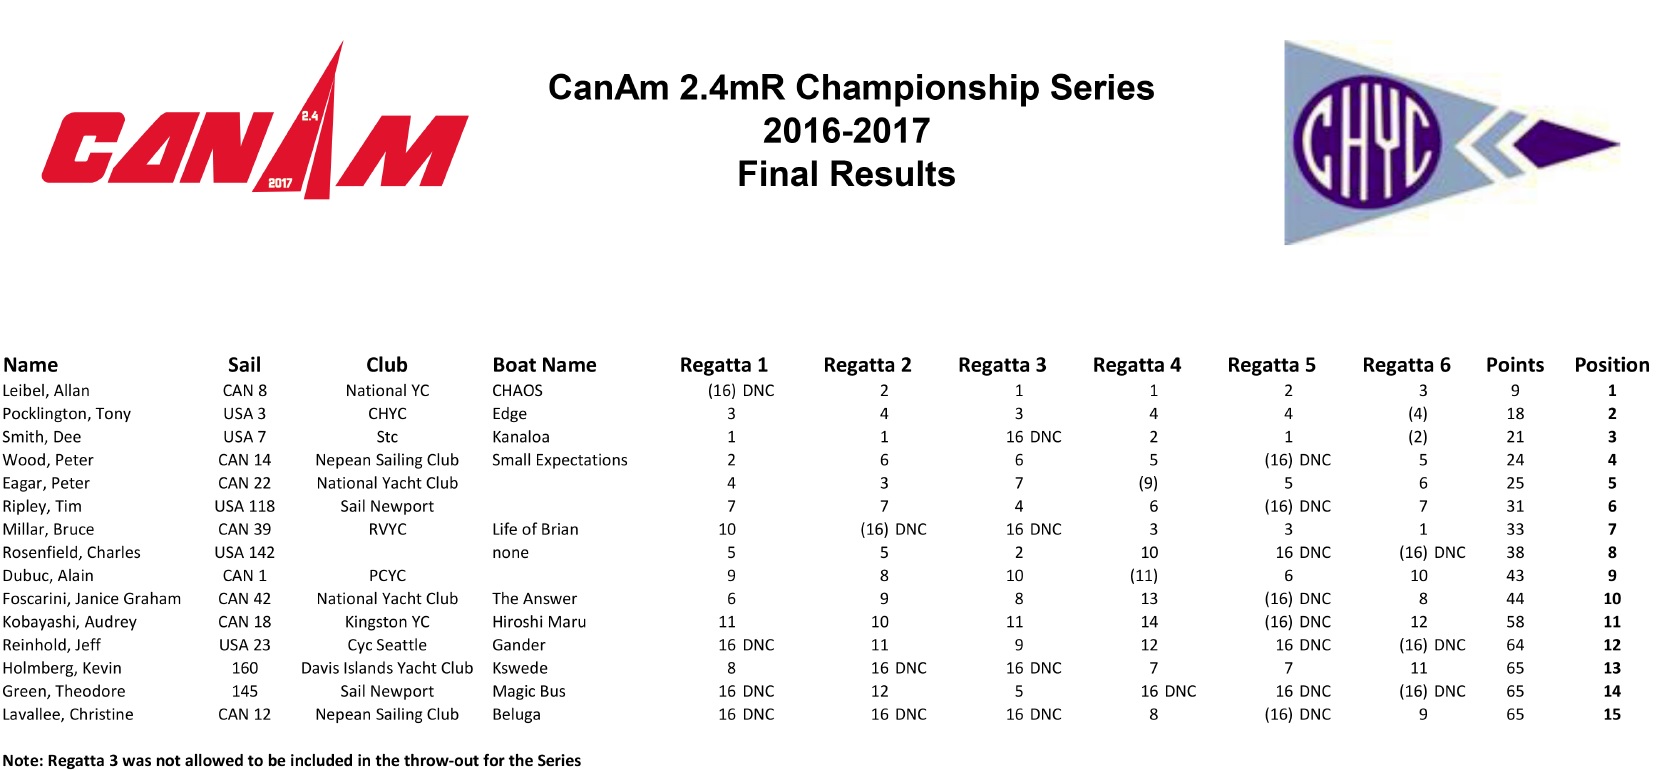 CanAm 2.4mR Championship Series 2018-2017 Final Results